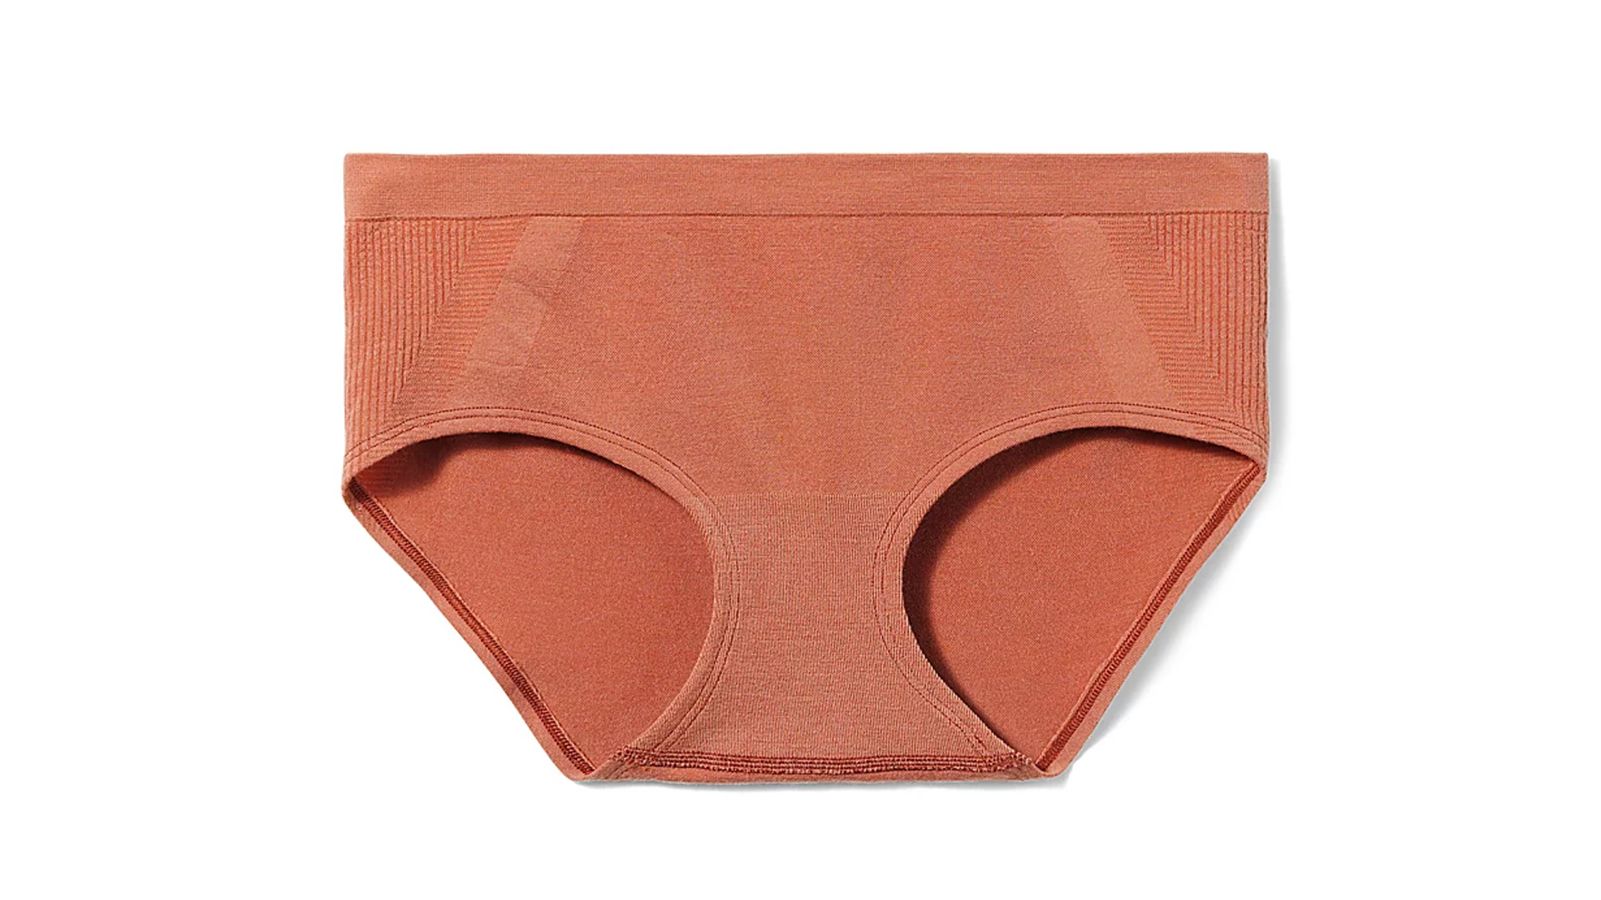 Comfortable & Quick-Drying Women's Underwear for a Campervanning